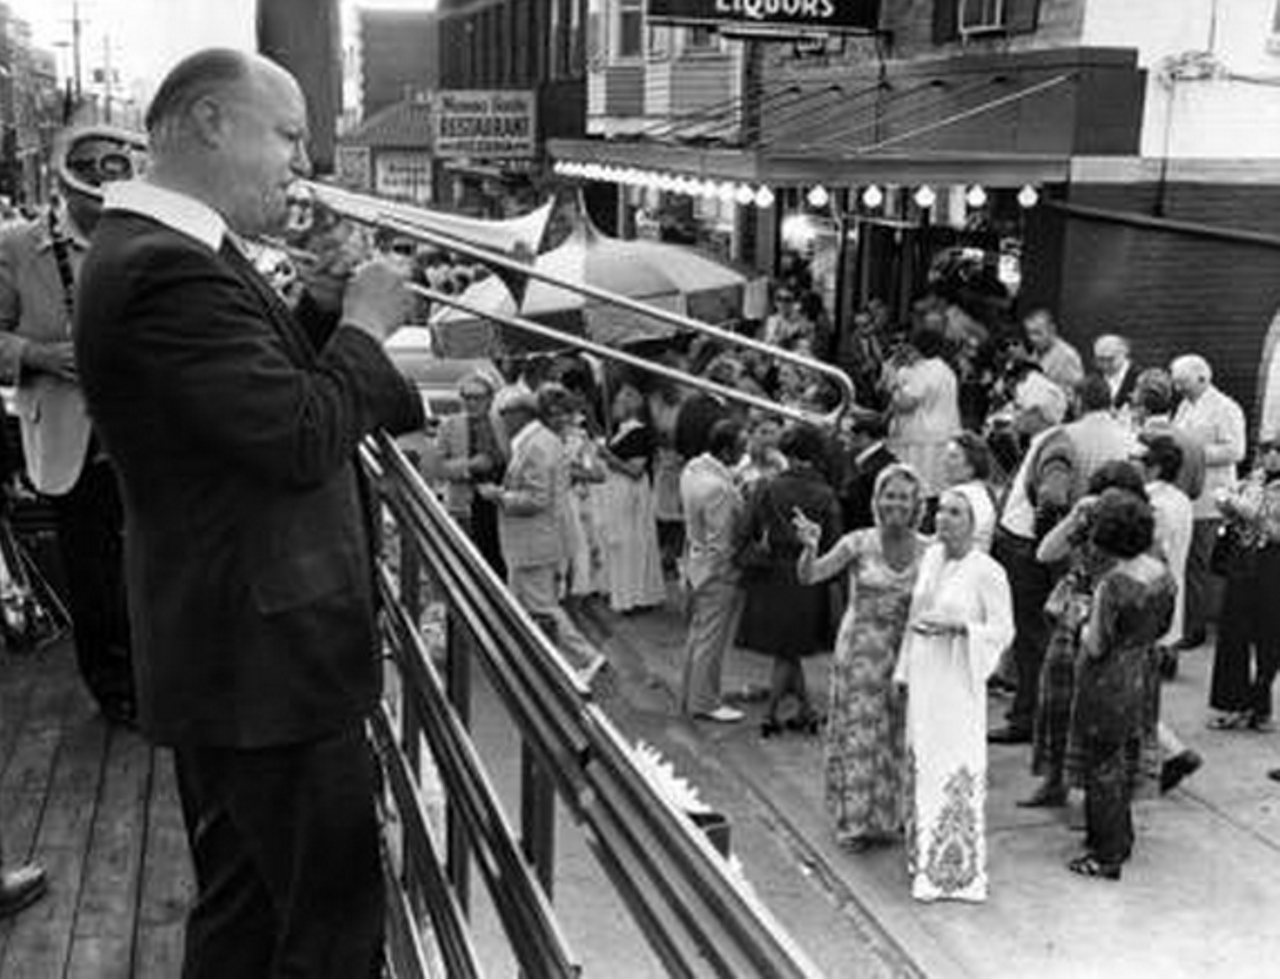 A crowd gathers to hear a musician play outside of Guarino's restaurant, 1975.